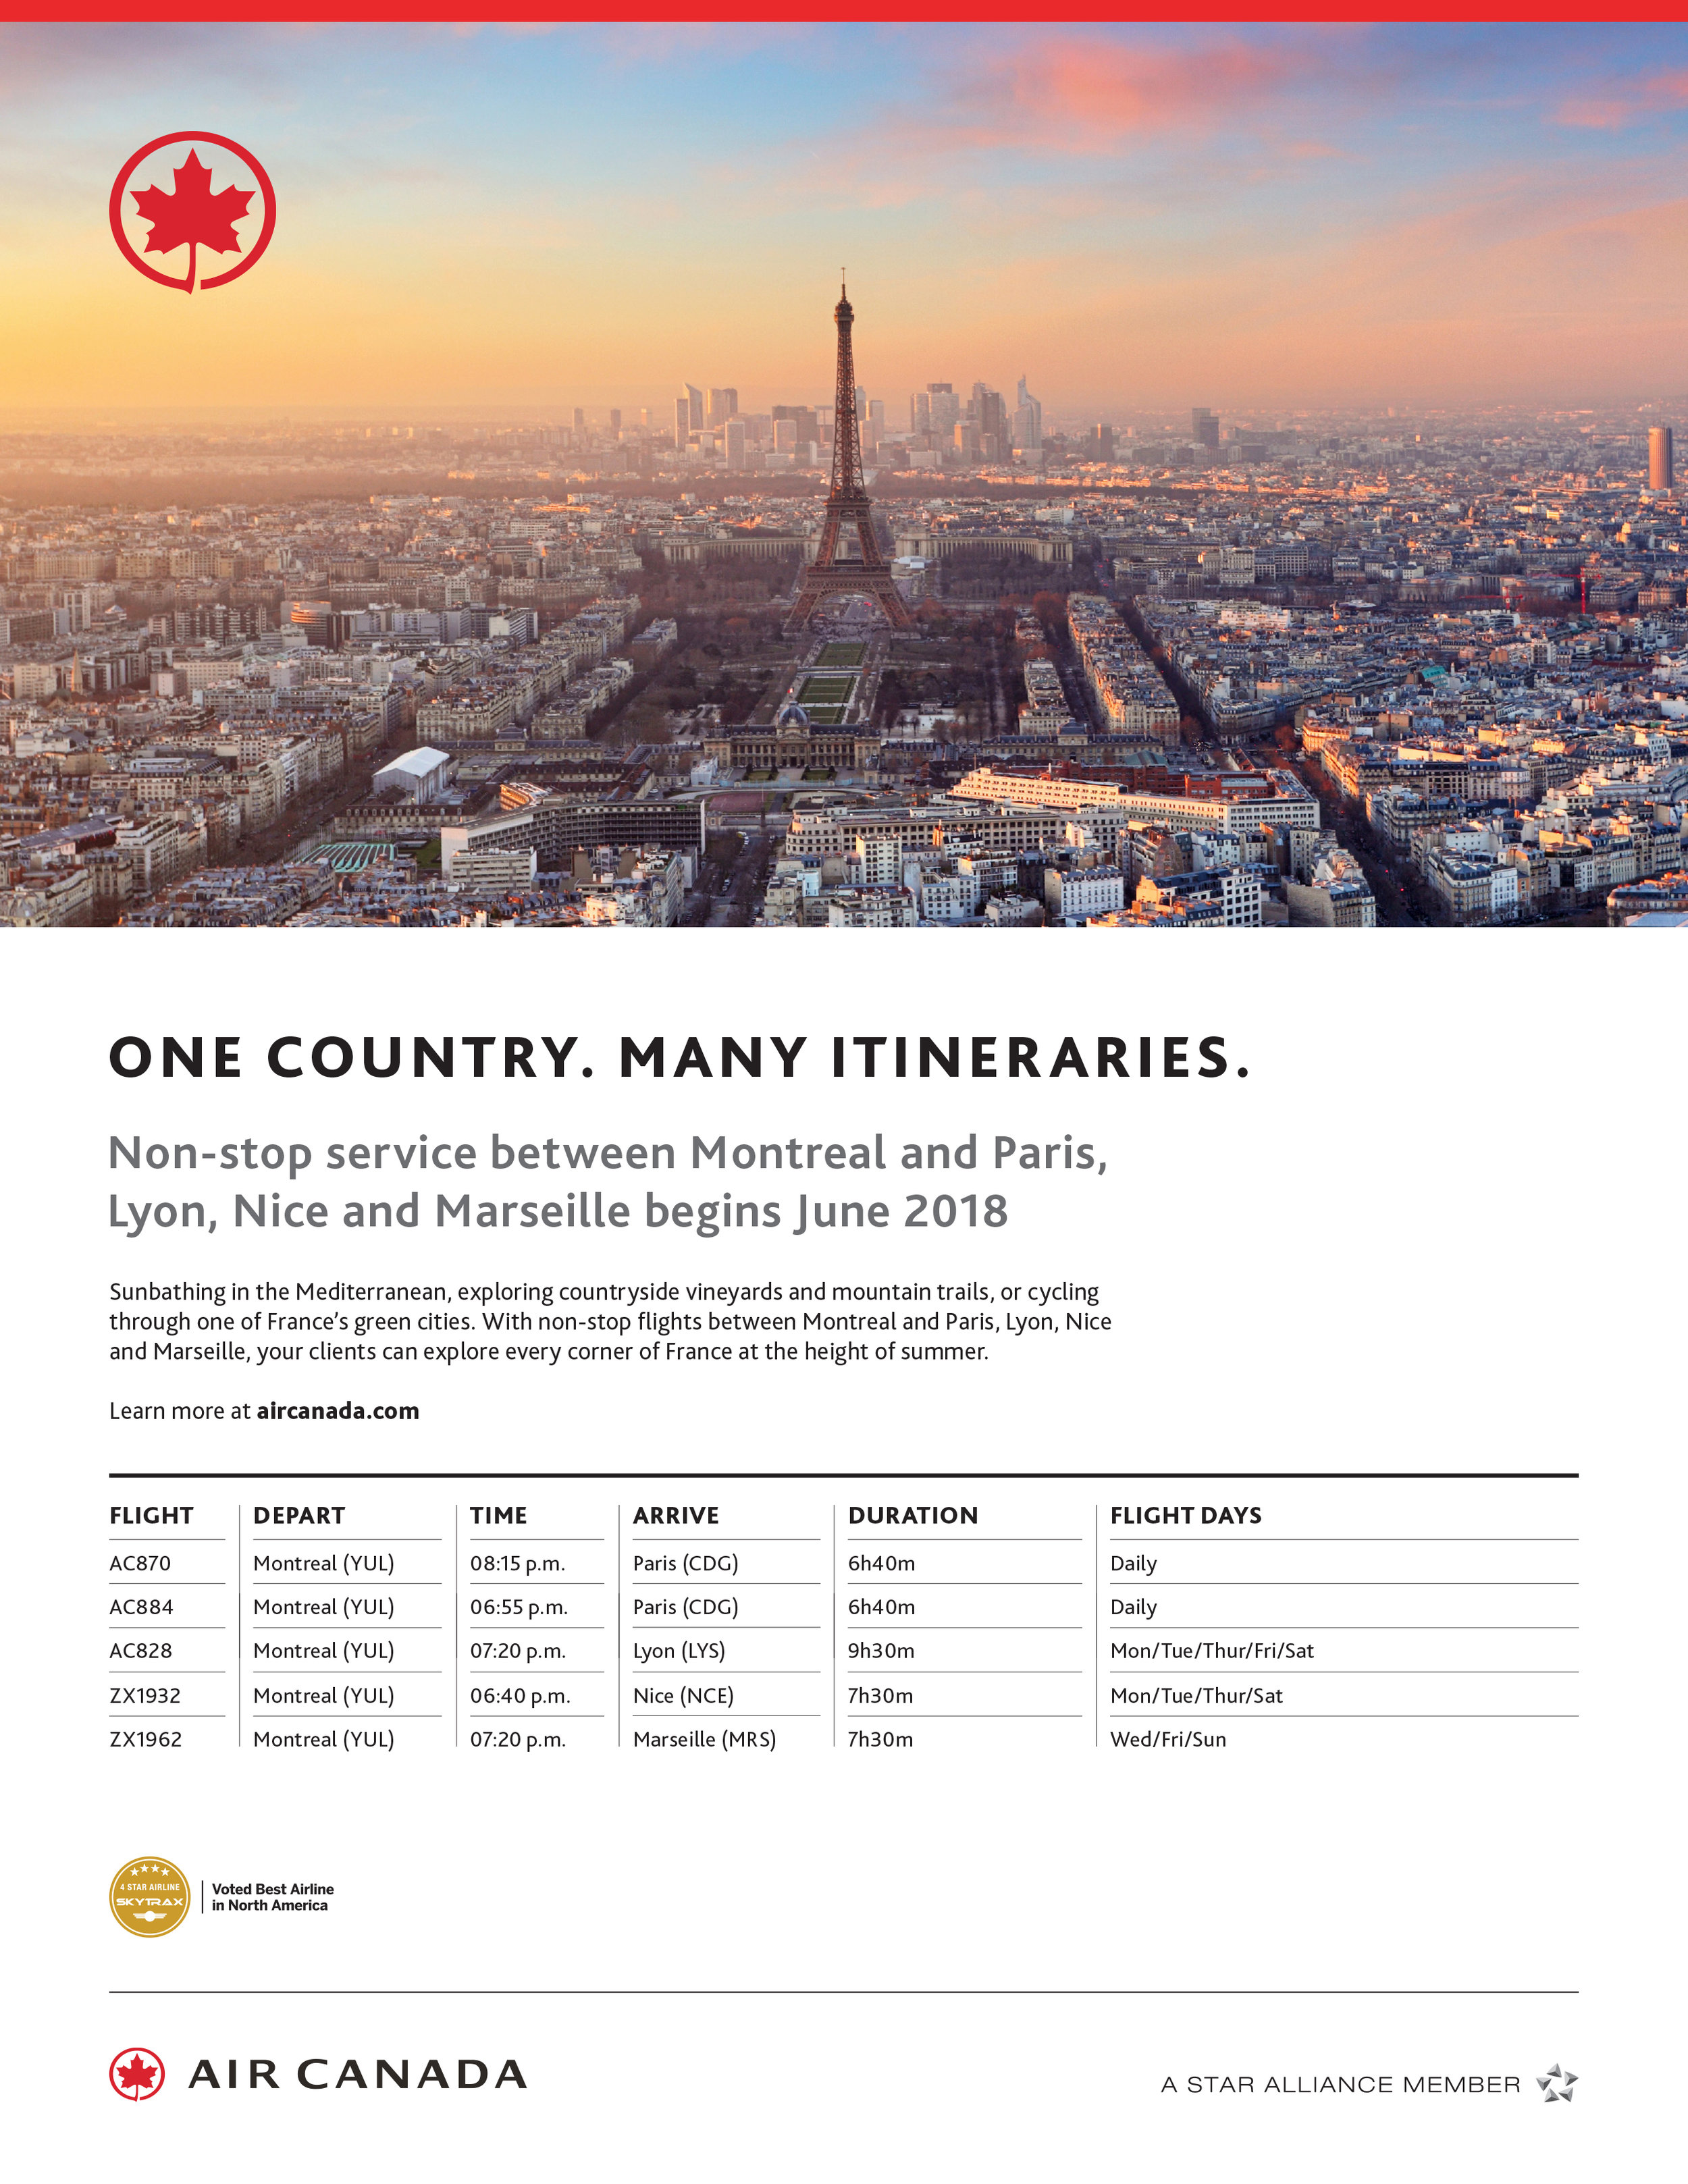 Air Canada Destination France from Montreal ad.jpg